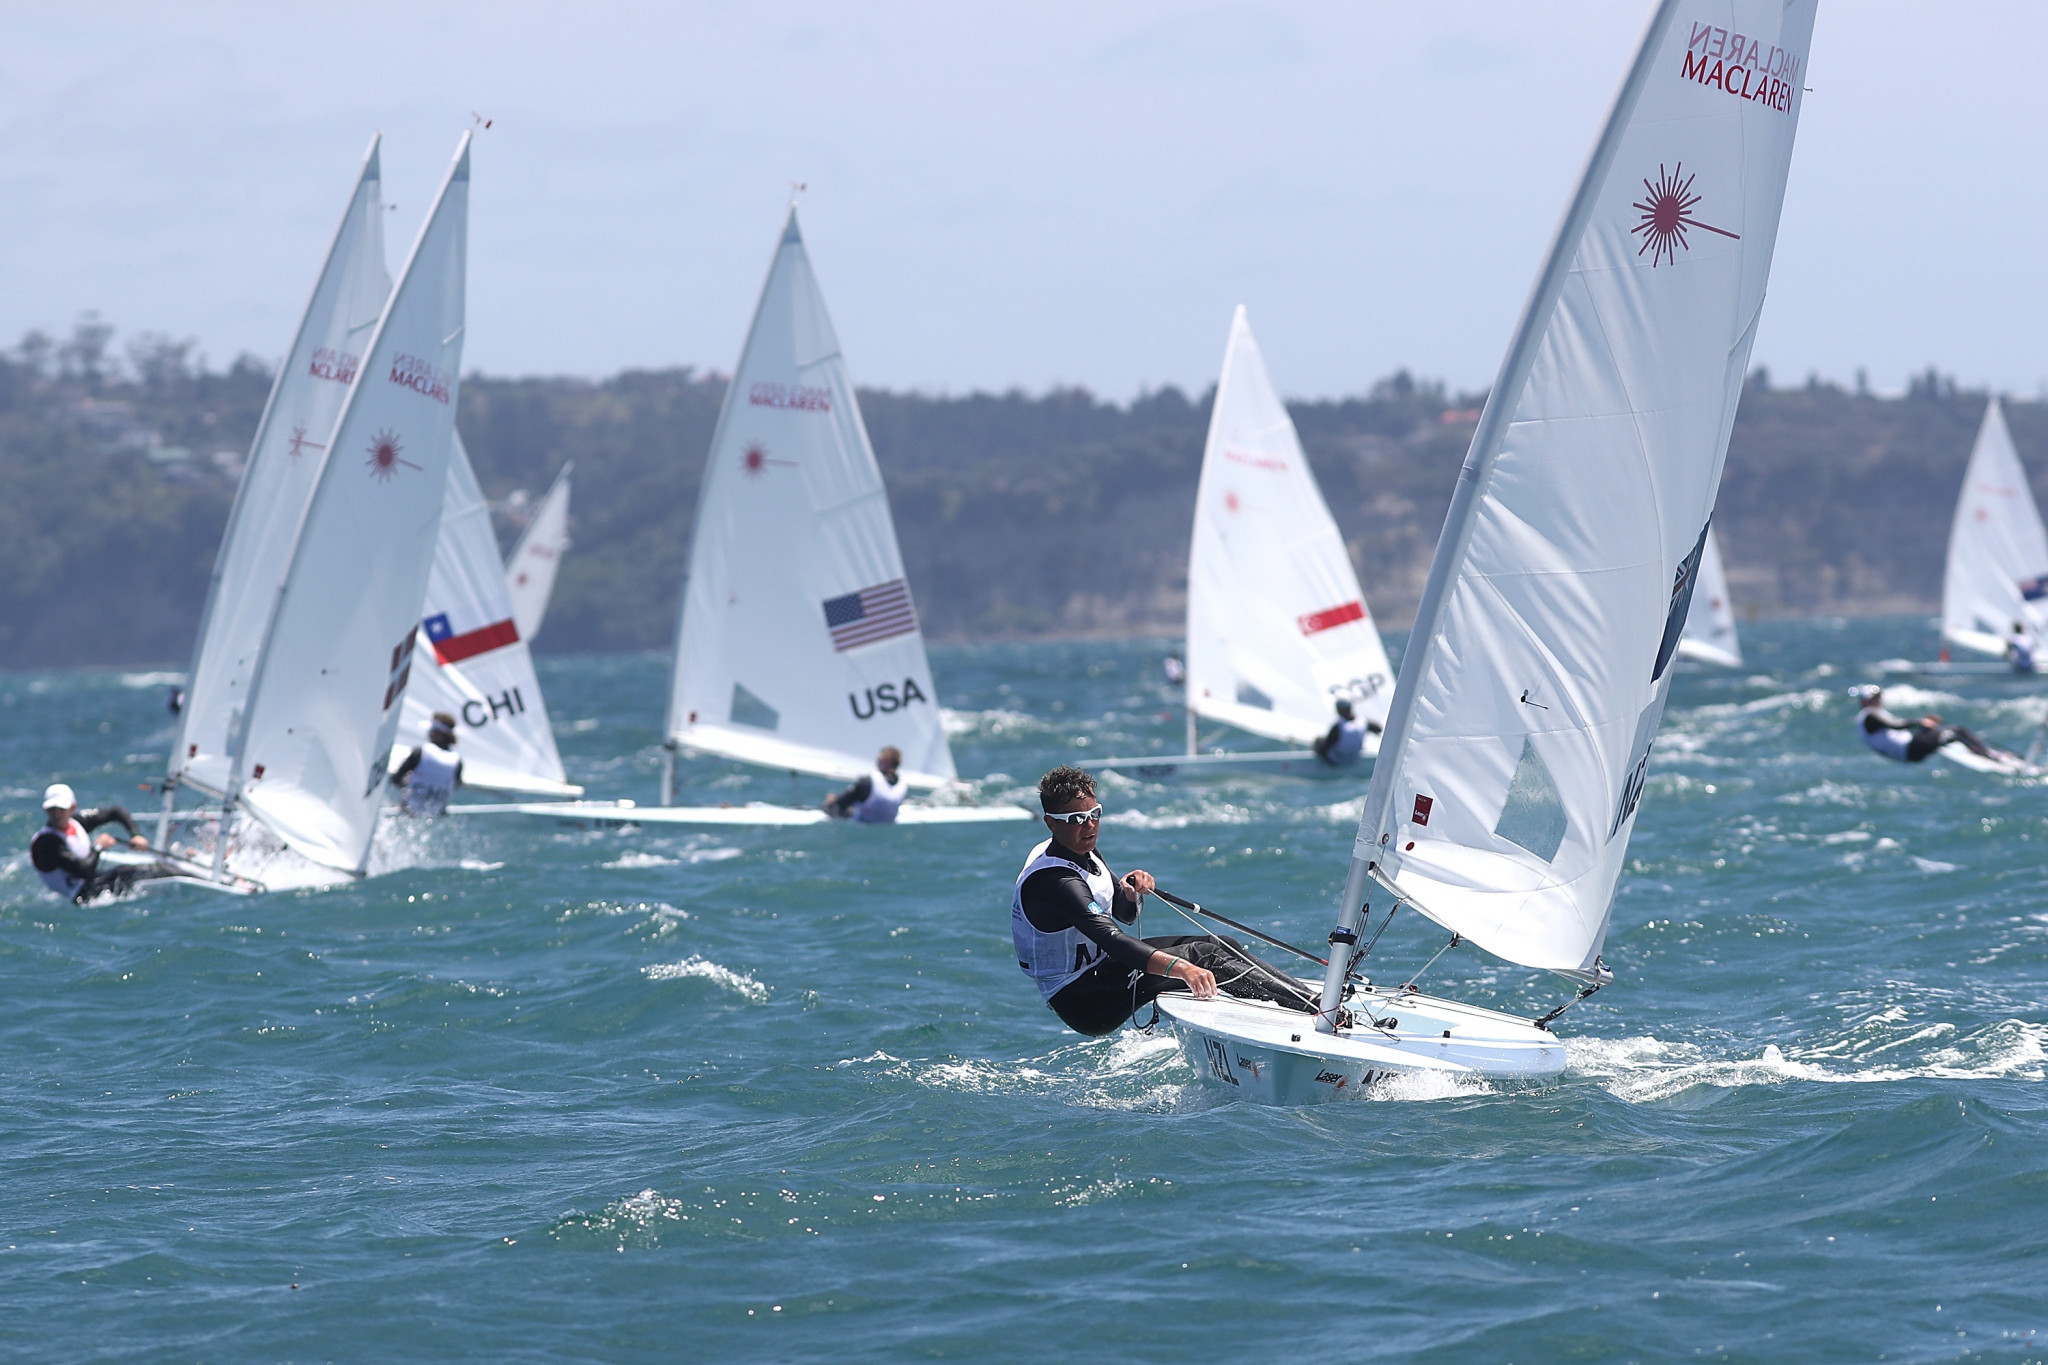 The bidding process for the 2022 Youth World Championships has been reopened ©World Sailing